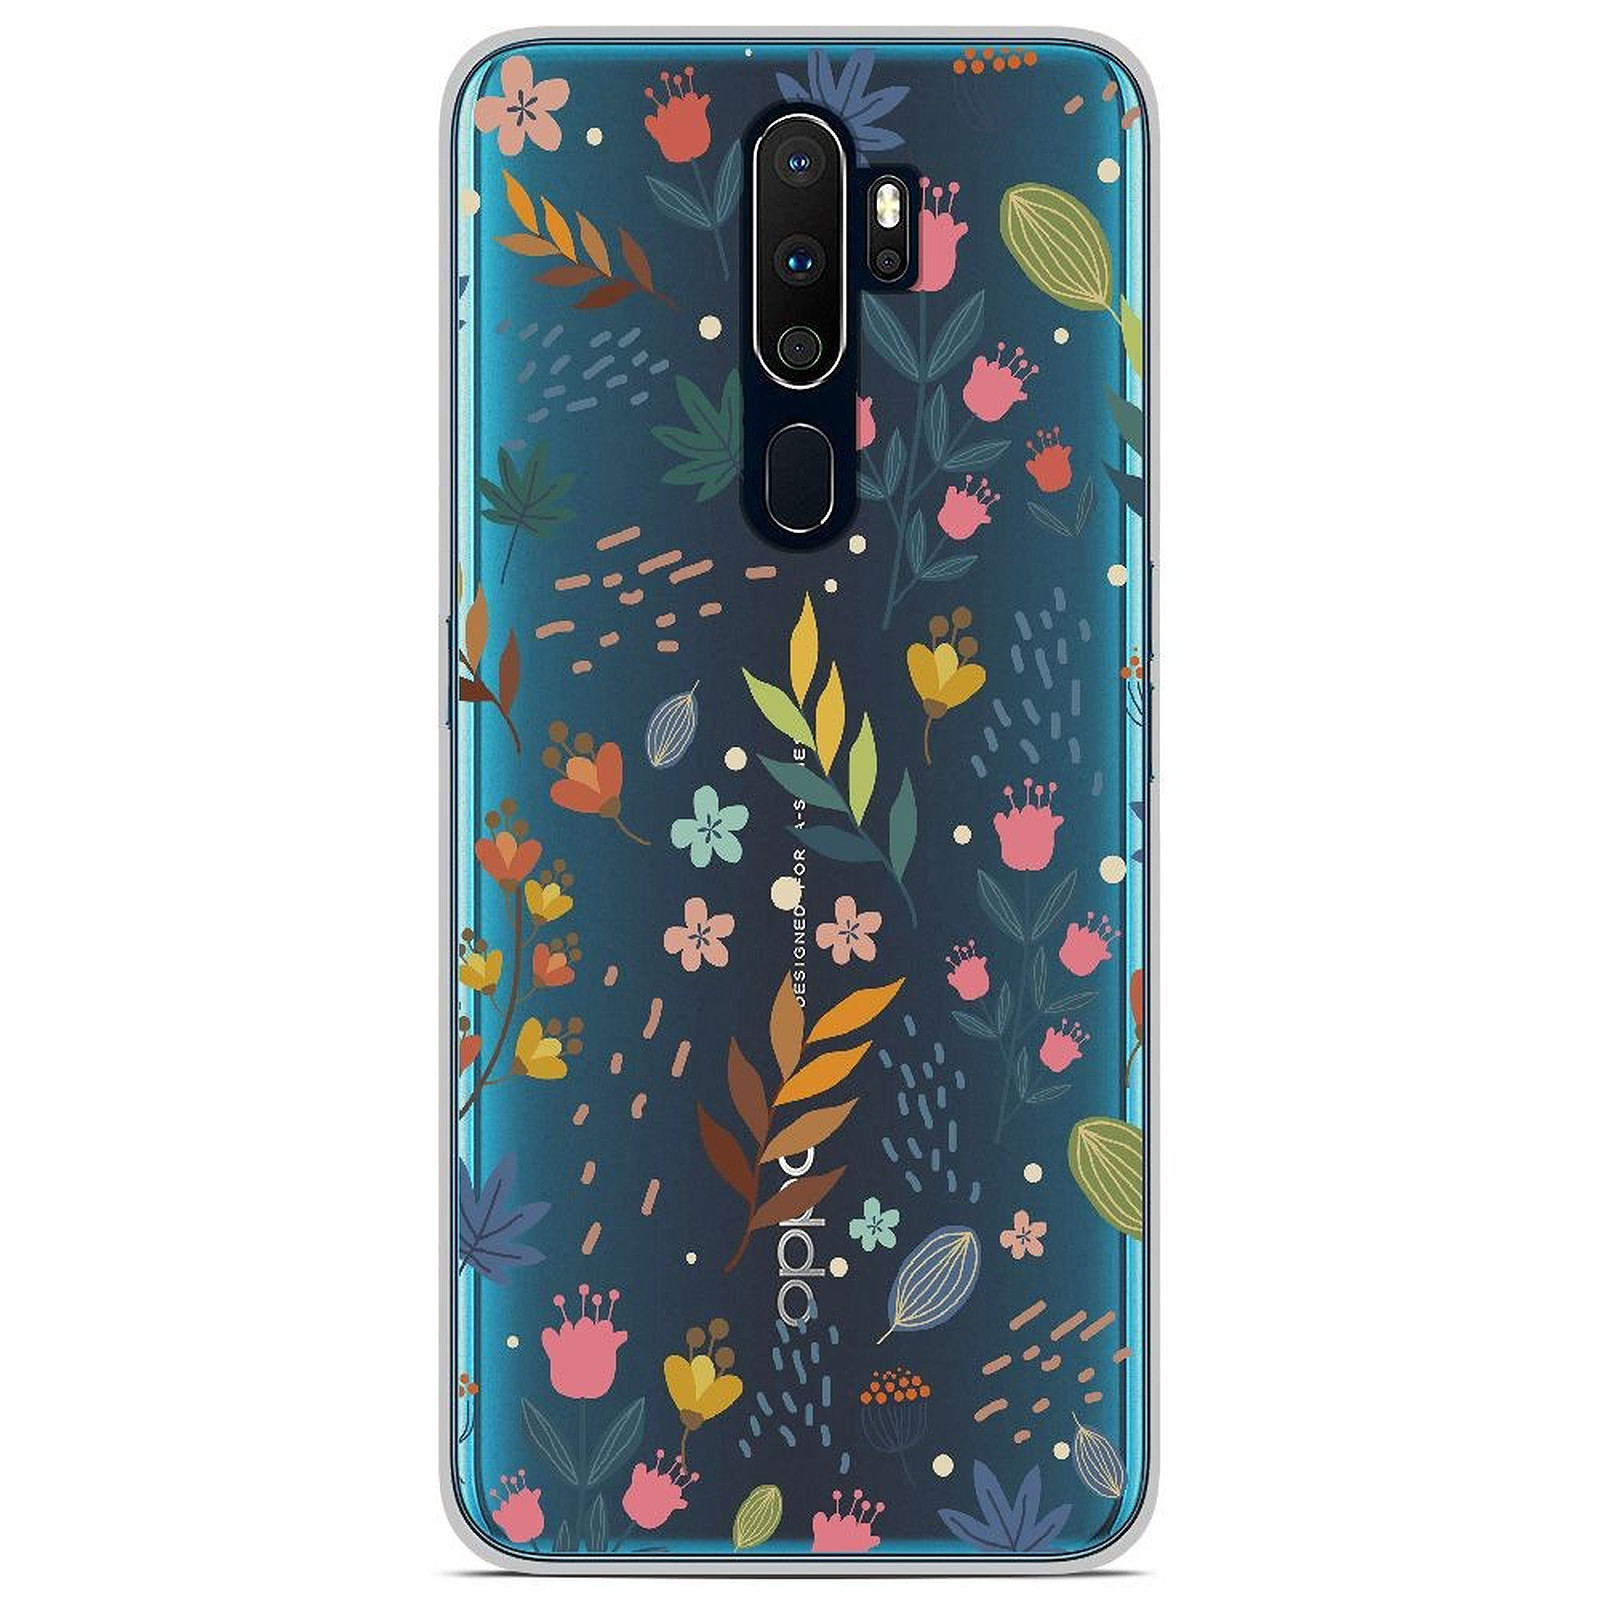 1001 Coques Coque silicone gel Oppo A5 2020 motif Fleurs colorees - Coque telephone 1001Coques